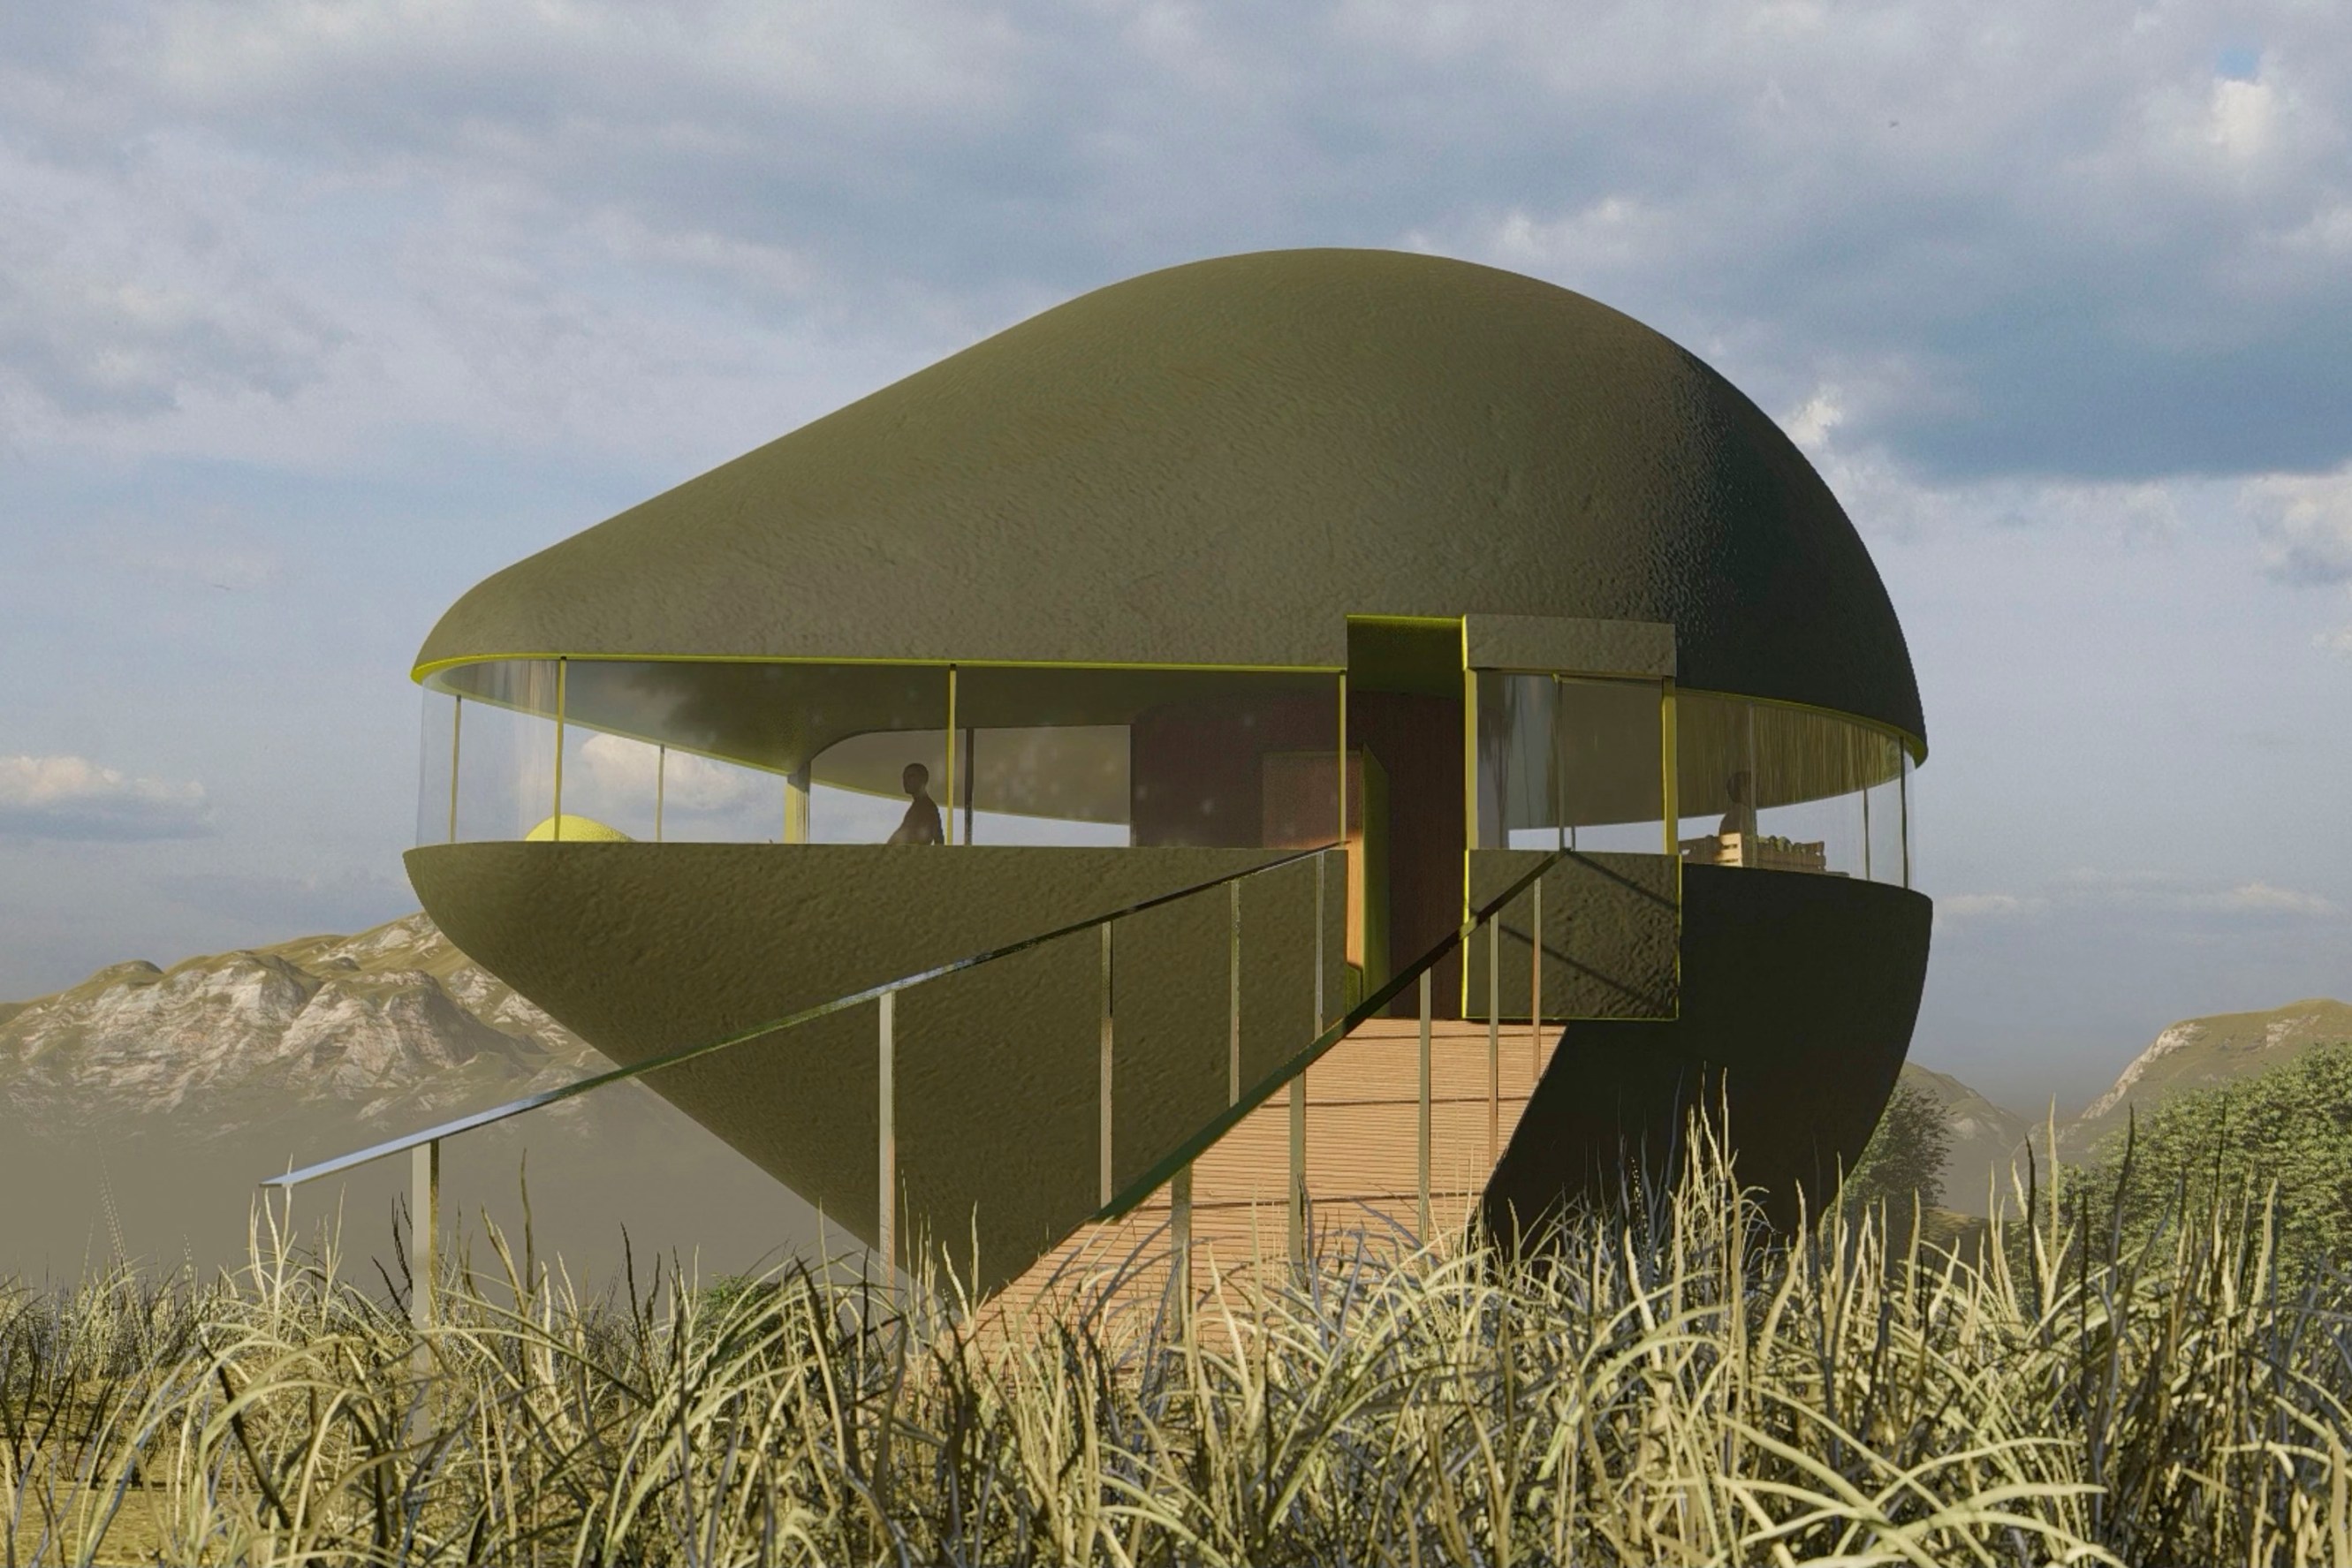 Home in the shape of a sideways avocado